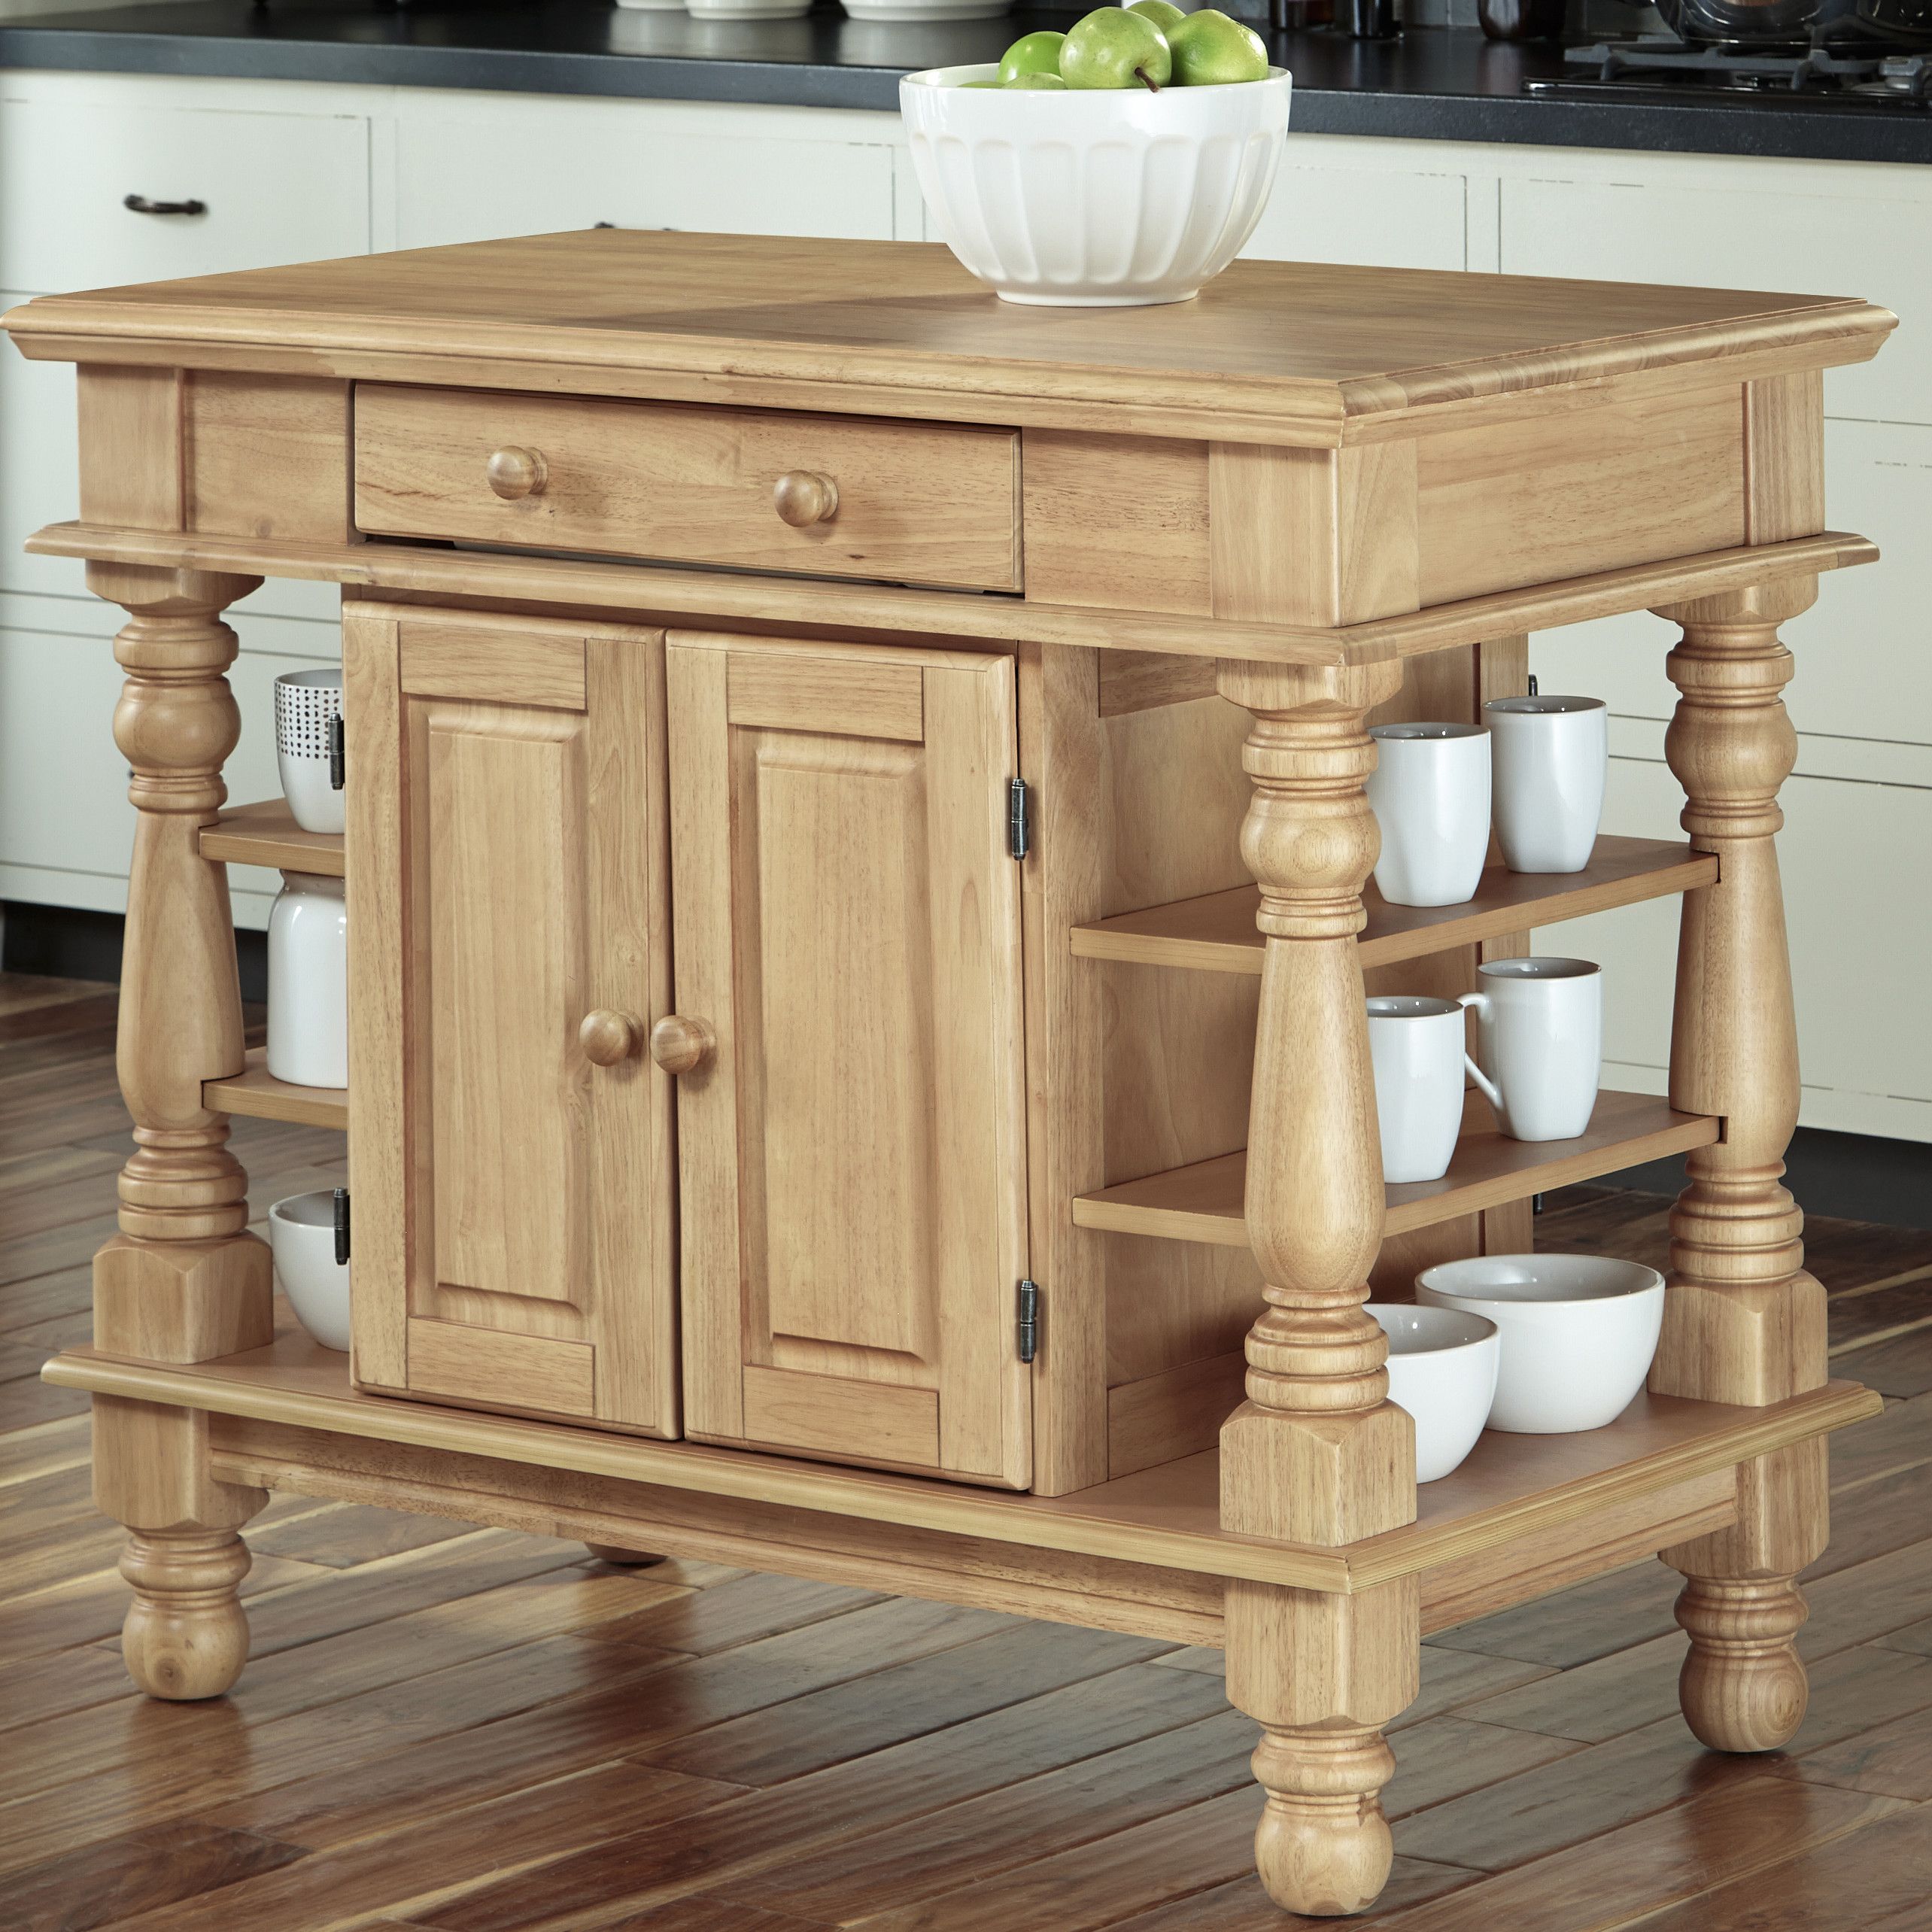 Collette Kitchen Island with Solid Wood Top | Kitchen design small, New